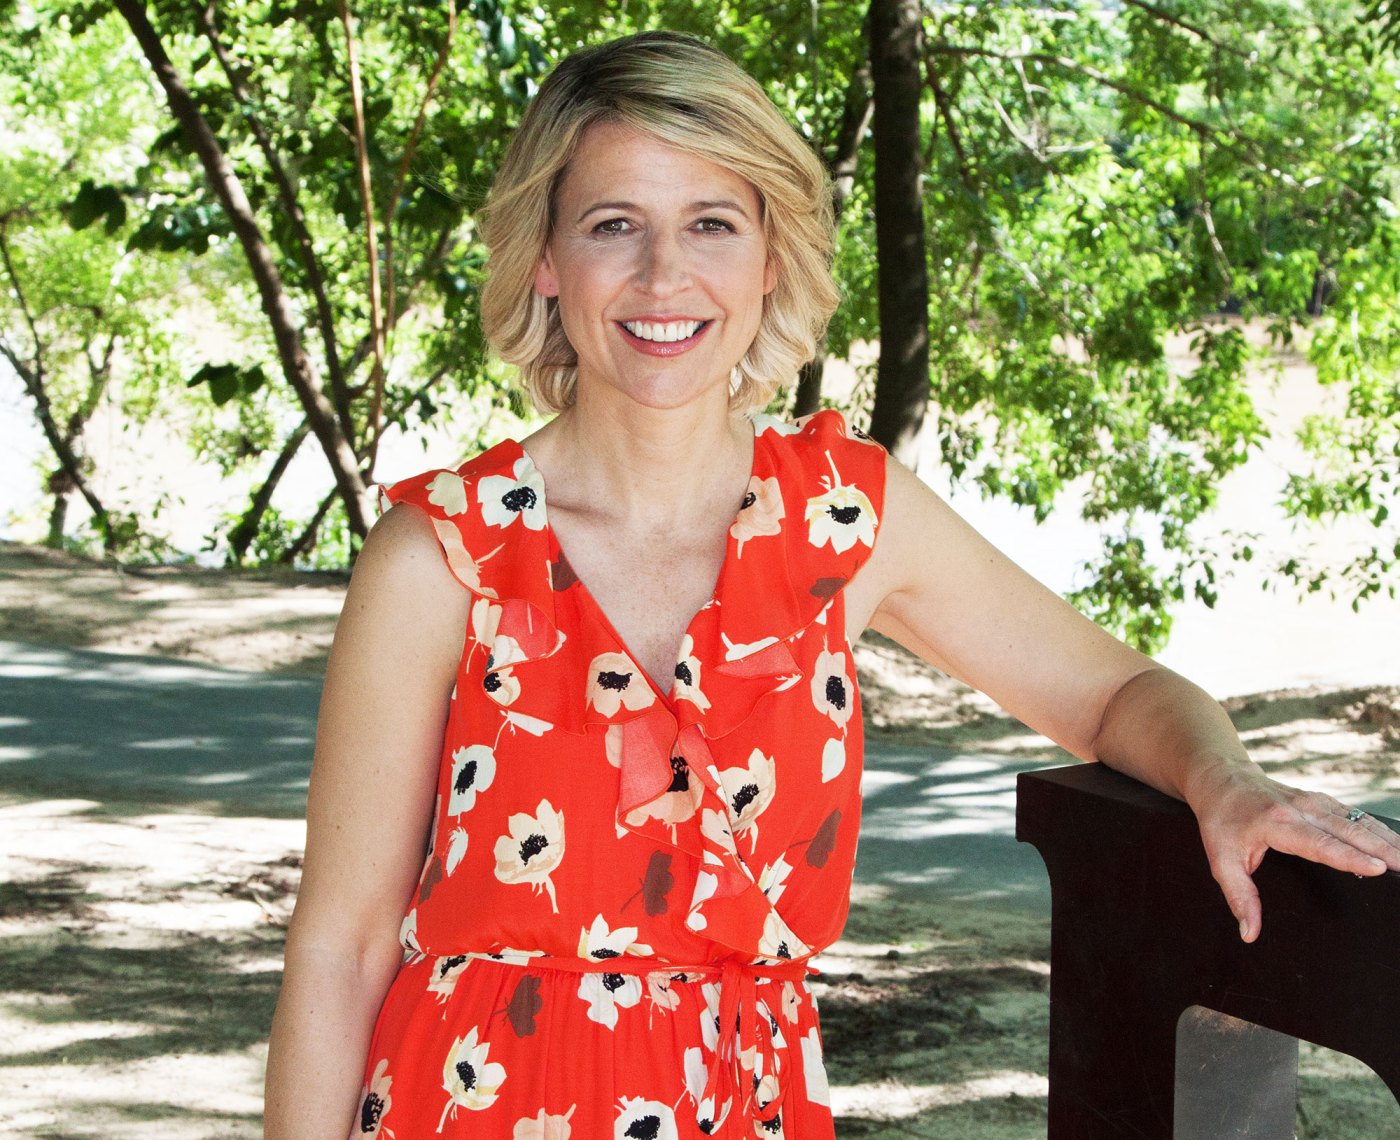 Travel Expert Samantha Brown Shares Tips for Flying With Kids | UsWeekly